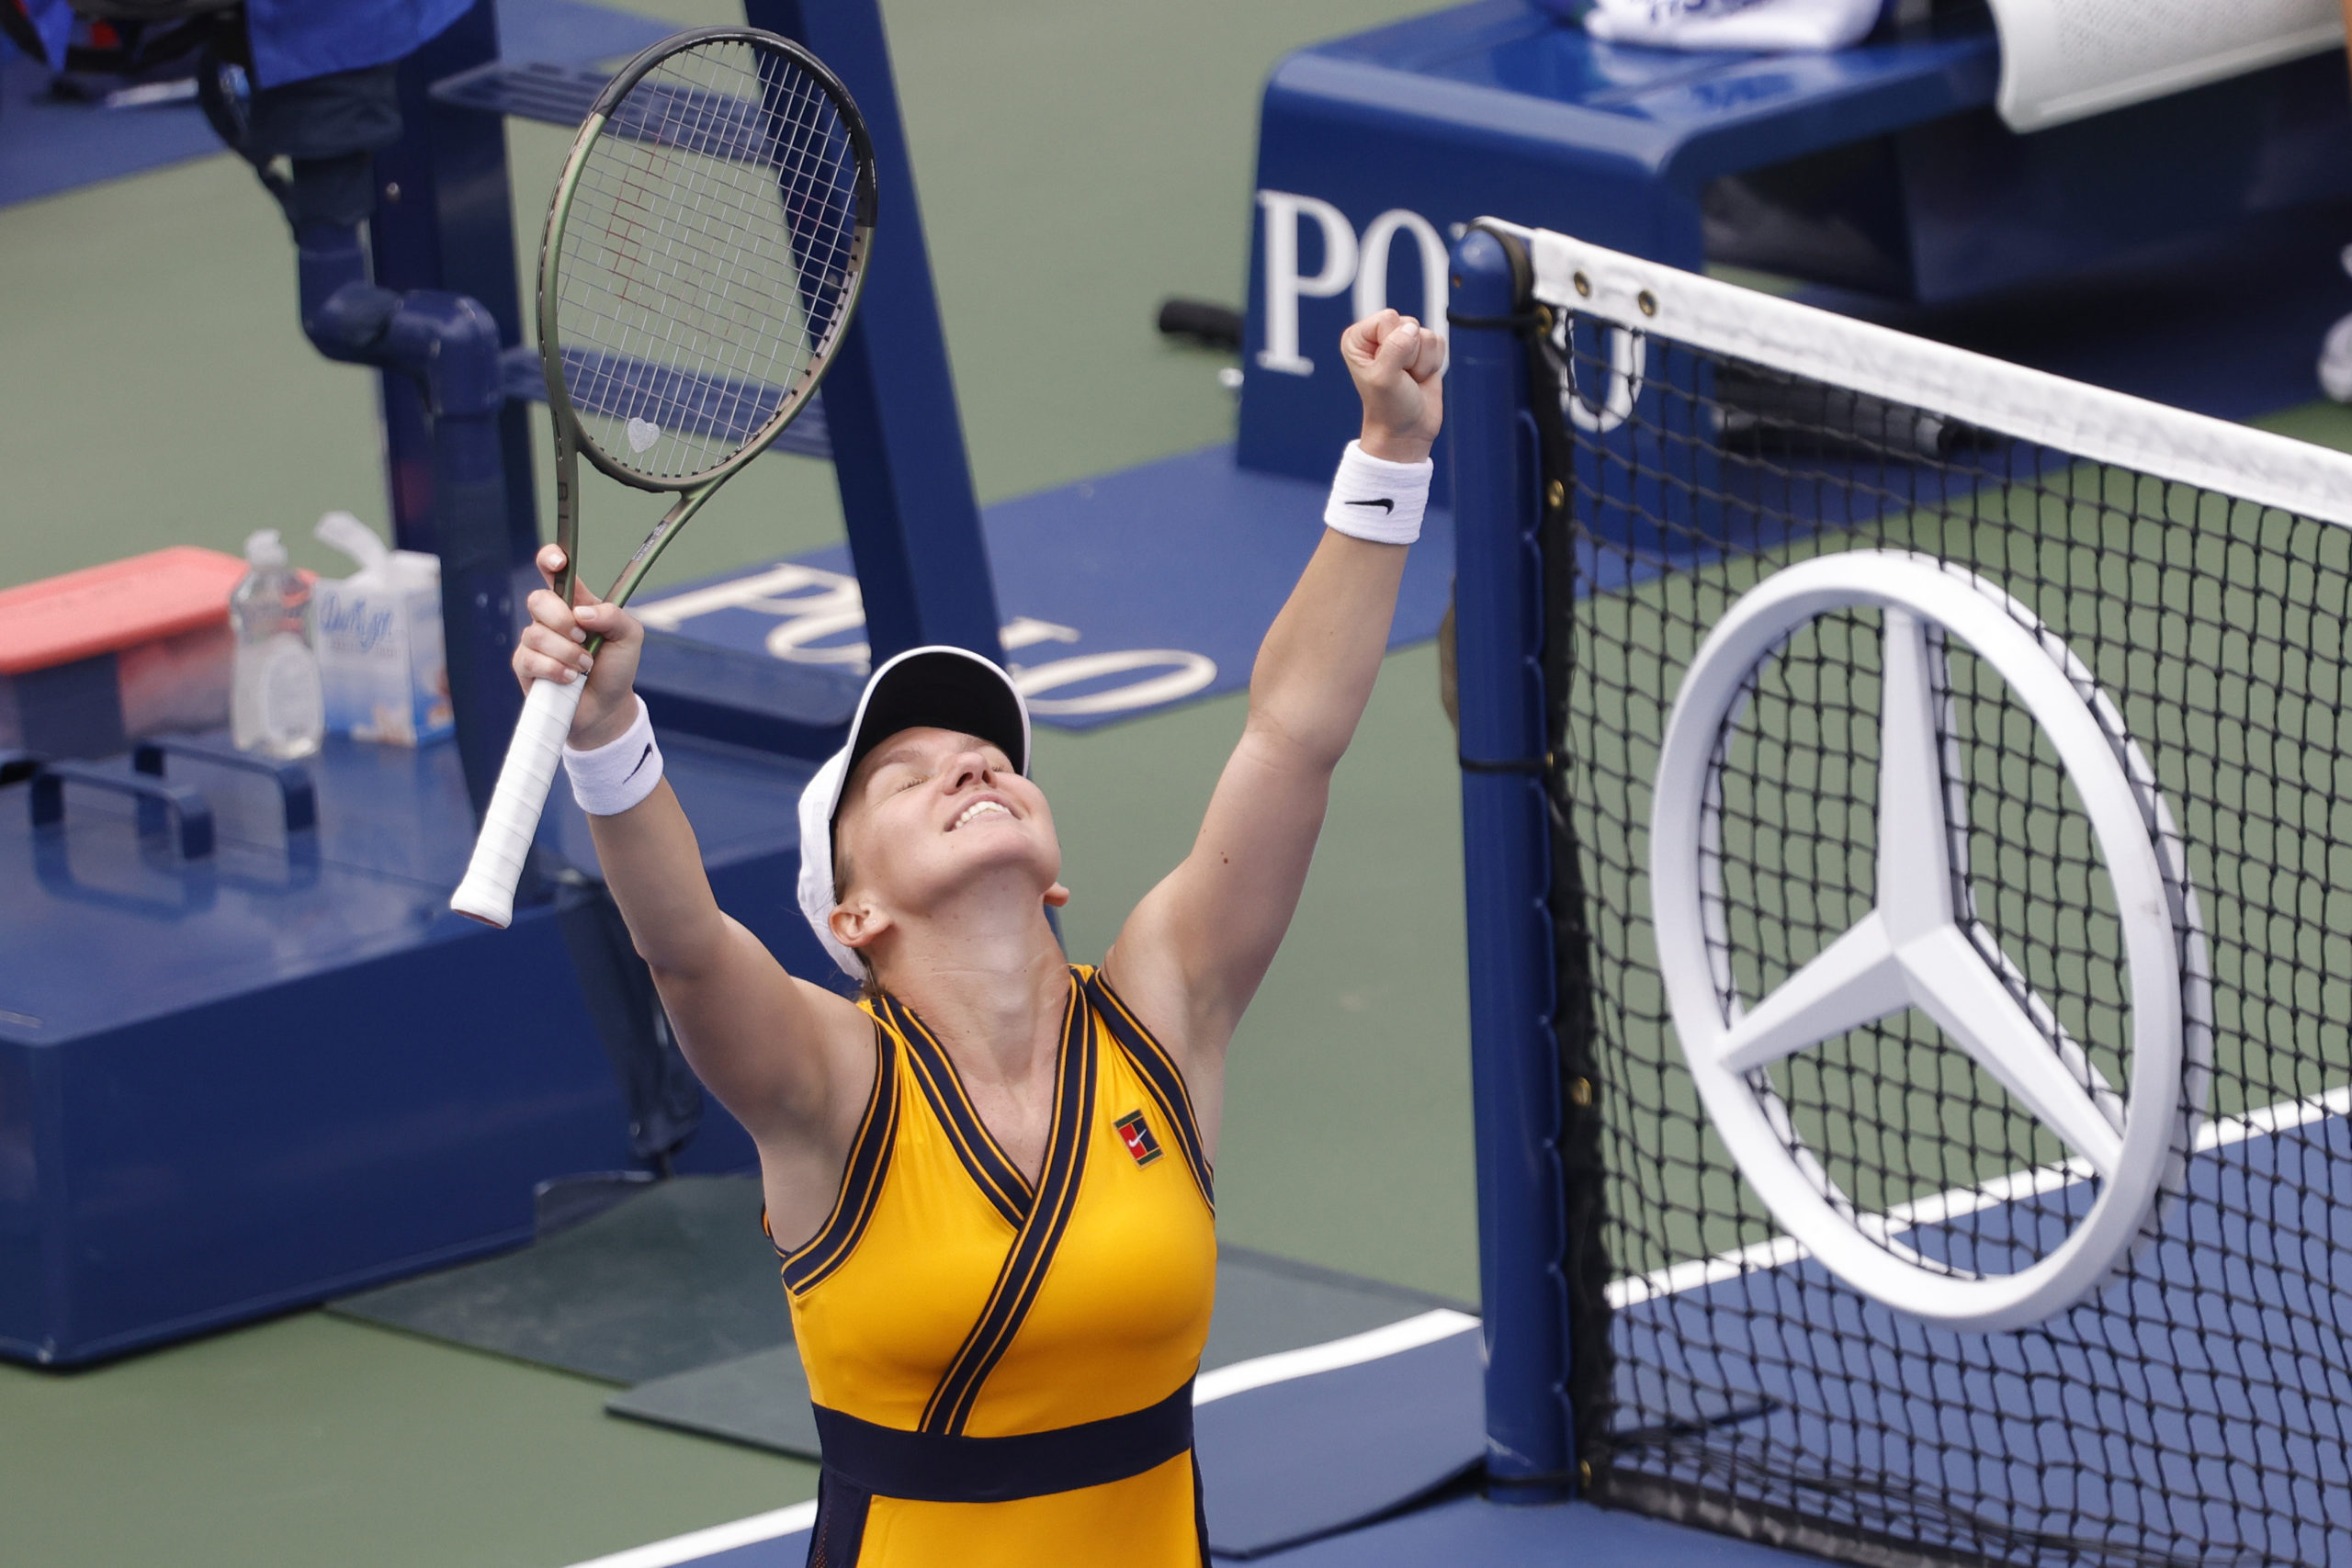 Simona Halep (ROU) celebrates after her match against Camila Giorgi (ITA) (not pictured) on day one of the 2021 U.S. Open tennis tournament at USTA Billie King National Tennis Center. 